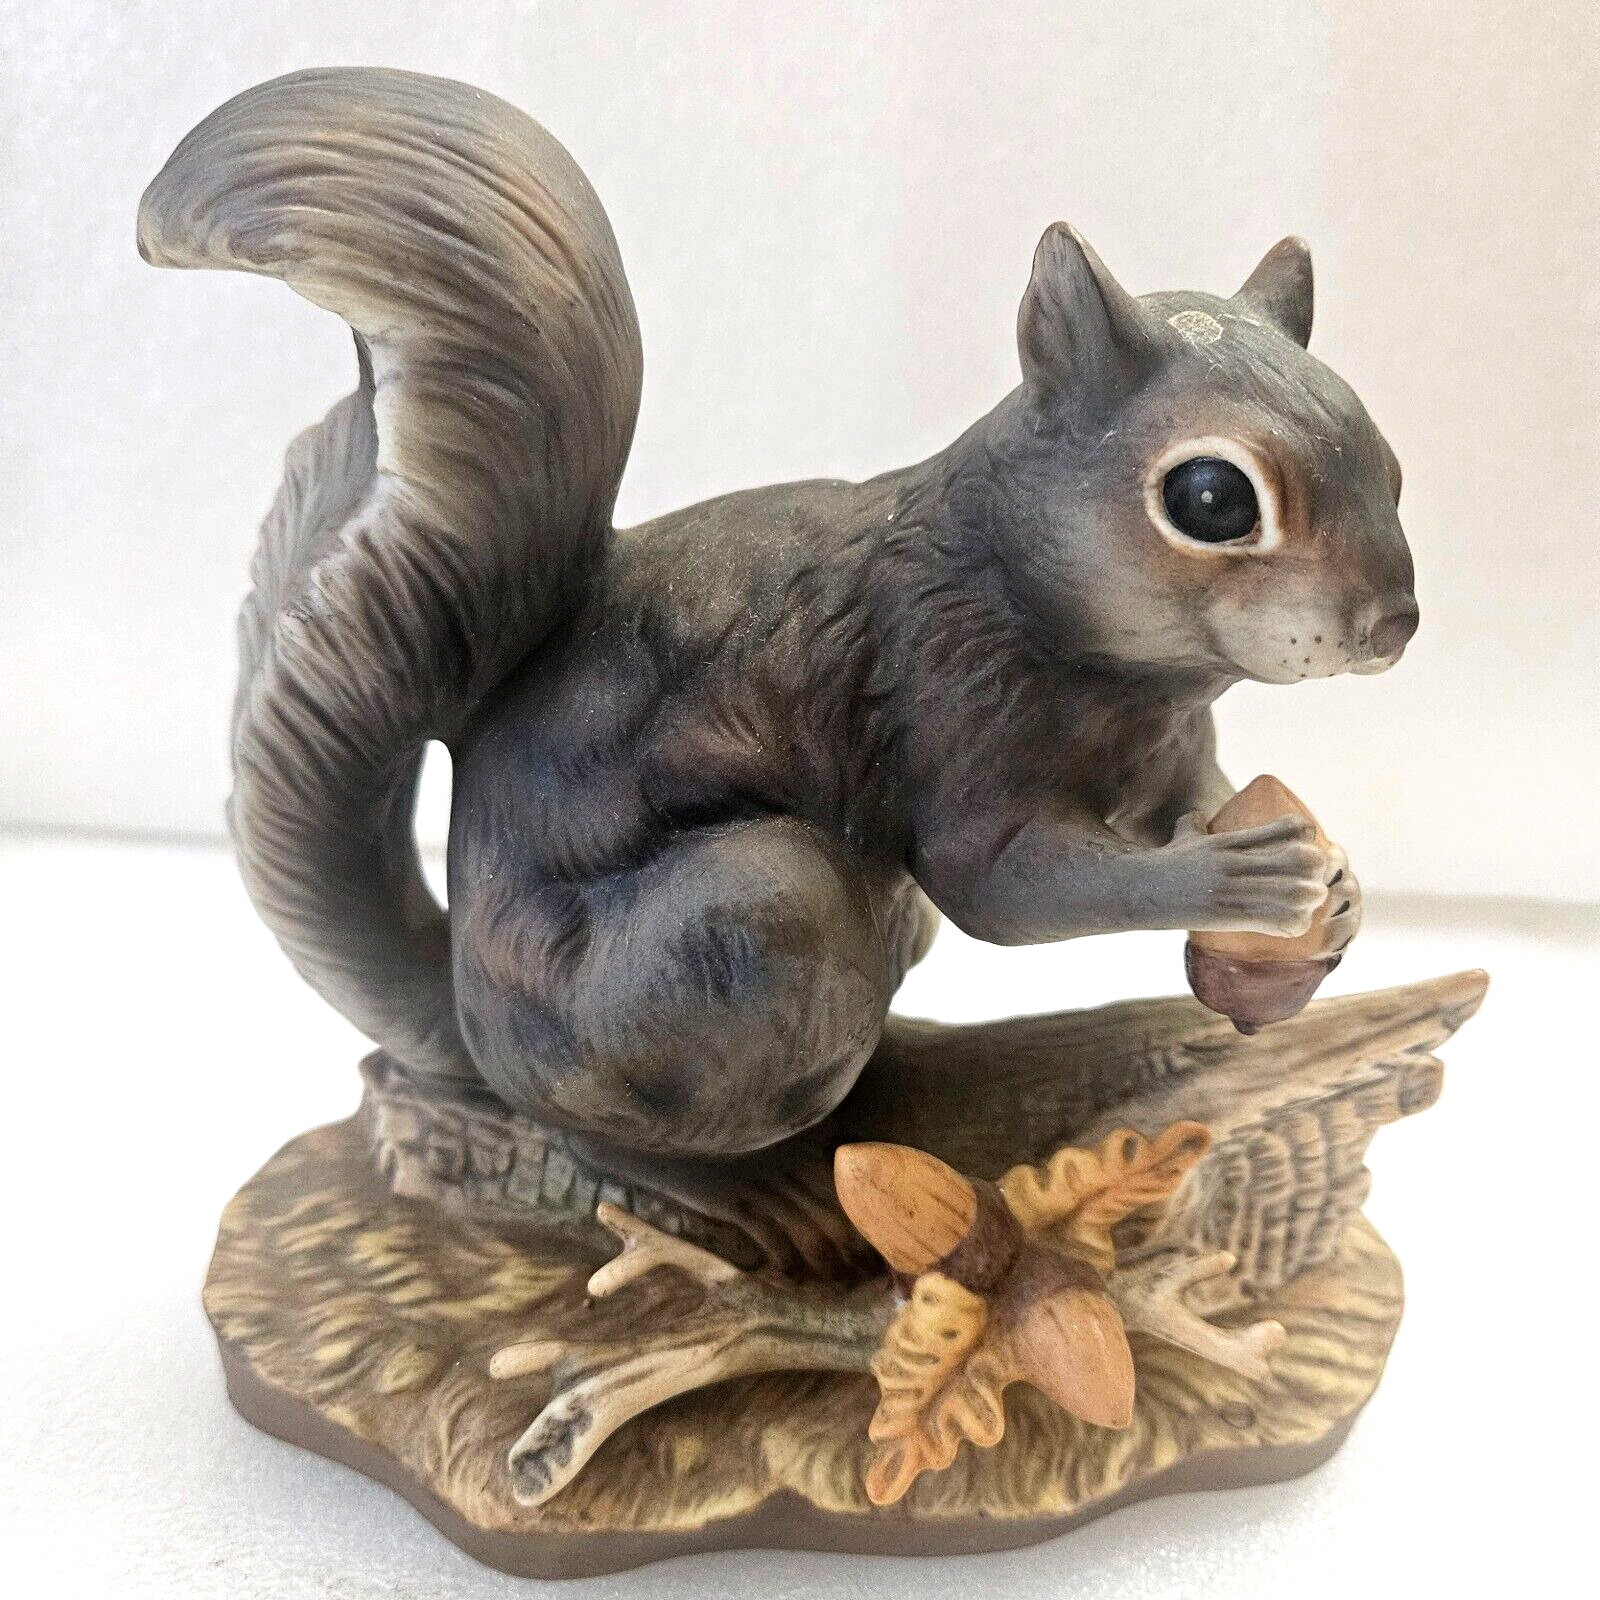 Vintage 1982 Gray Porcelain Squirrel/Masterpiece by Homco/Beautifully Detailed.